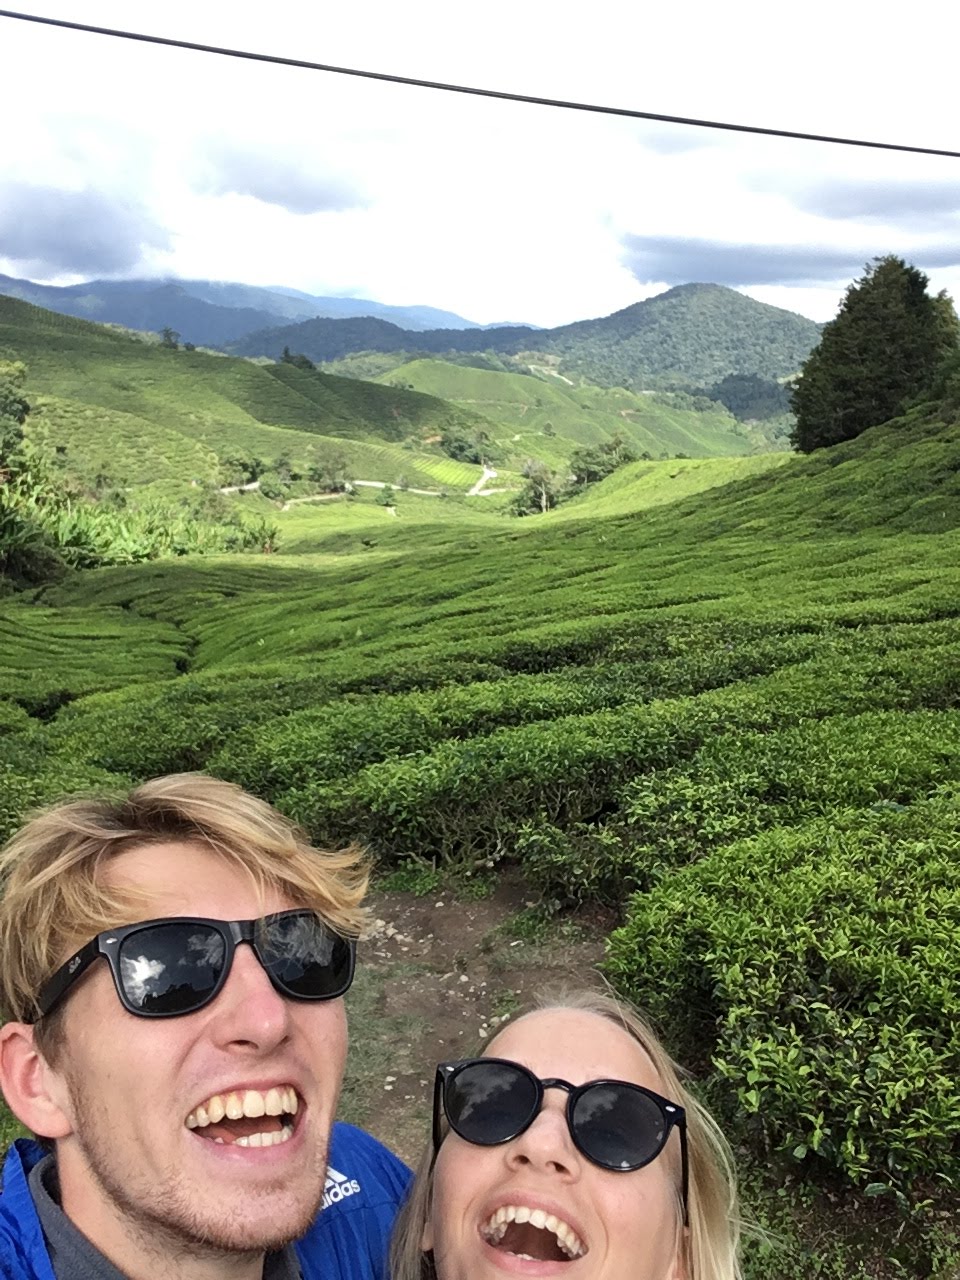 Me and Grete smiling between tea bushes